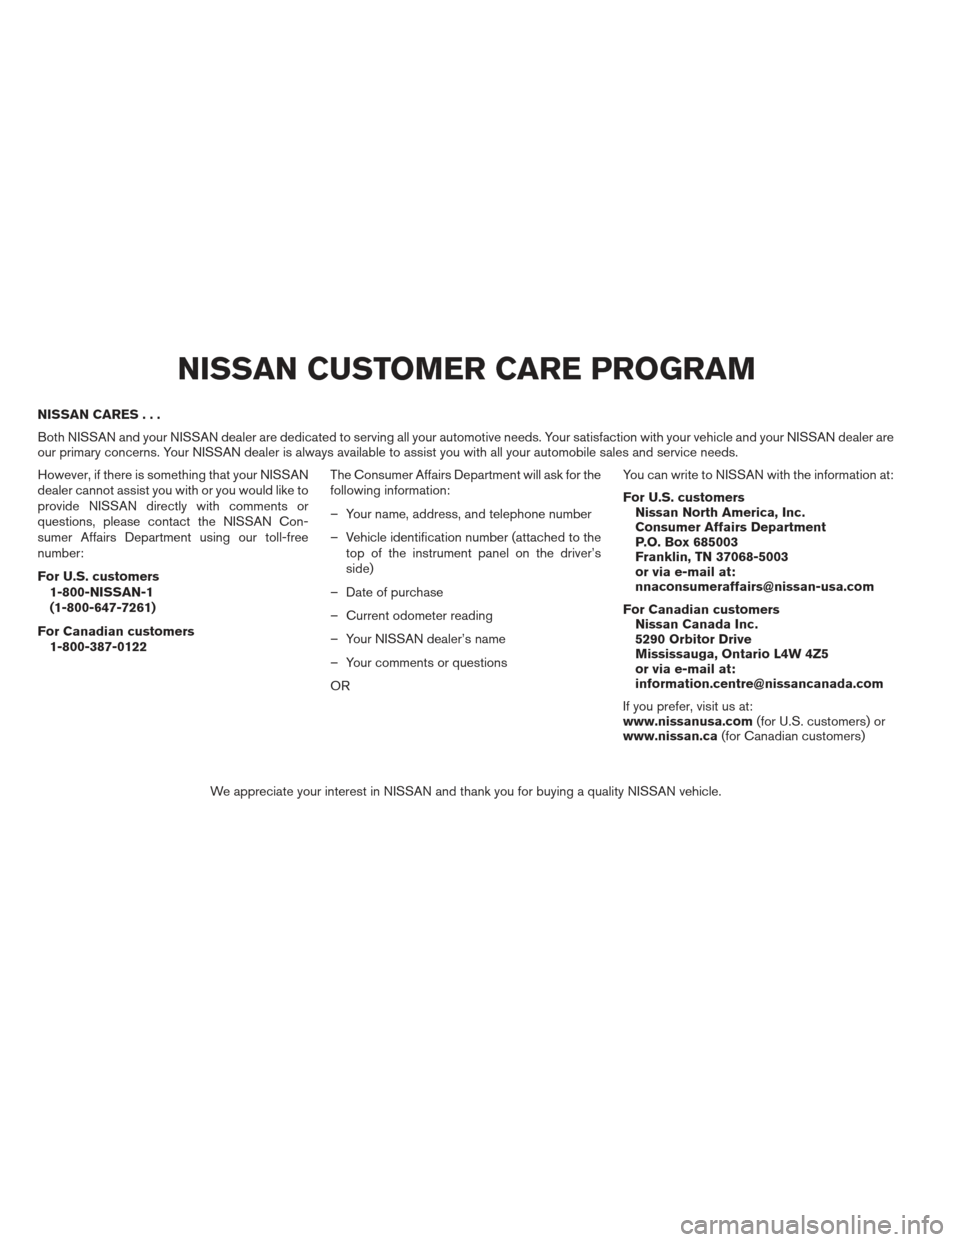 NISSAN VERSA SEDAN 2013 2.G Owners Manual NISSAN CARES...
Both NISSAN and your NISSAN dealer are dedicated to serving all your automotive needs. Your satisfaction with your vehicle and your NISSAN dealer are
our primary concerns. Your NISSAN 